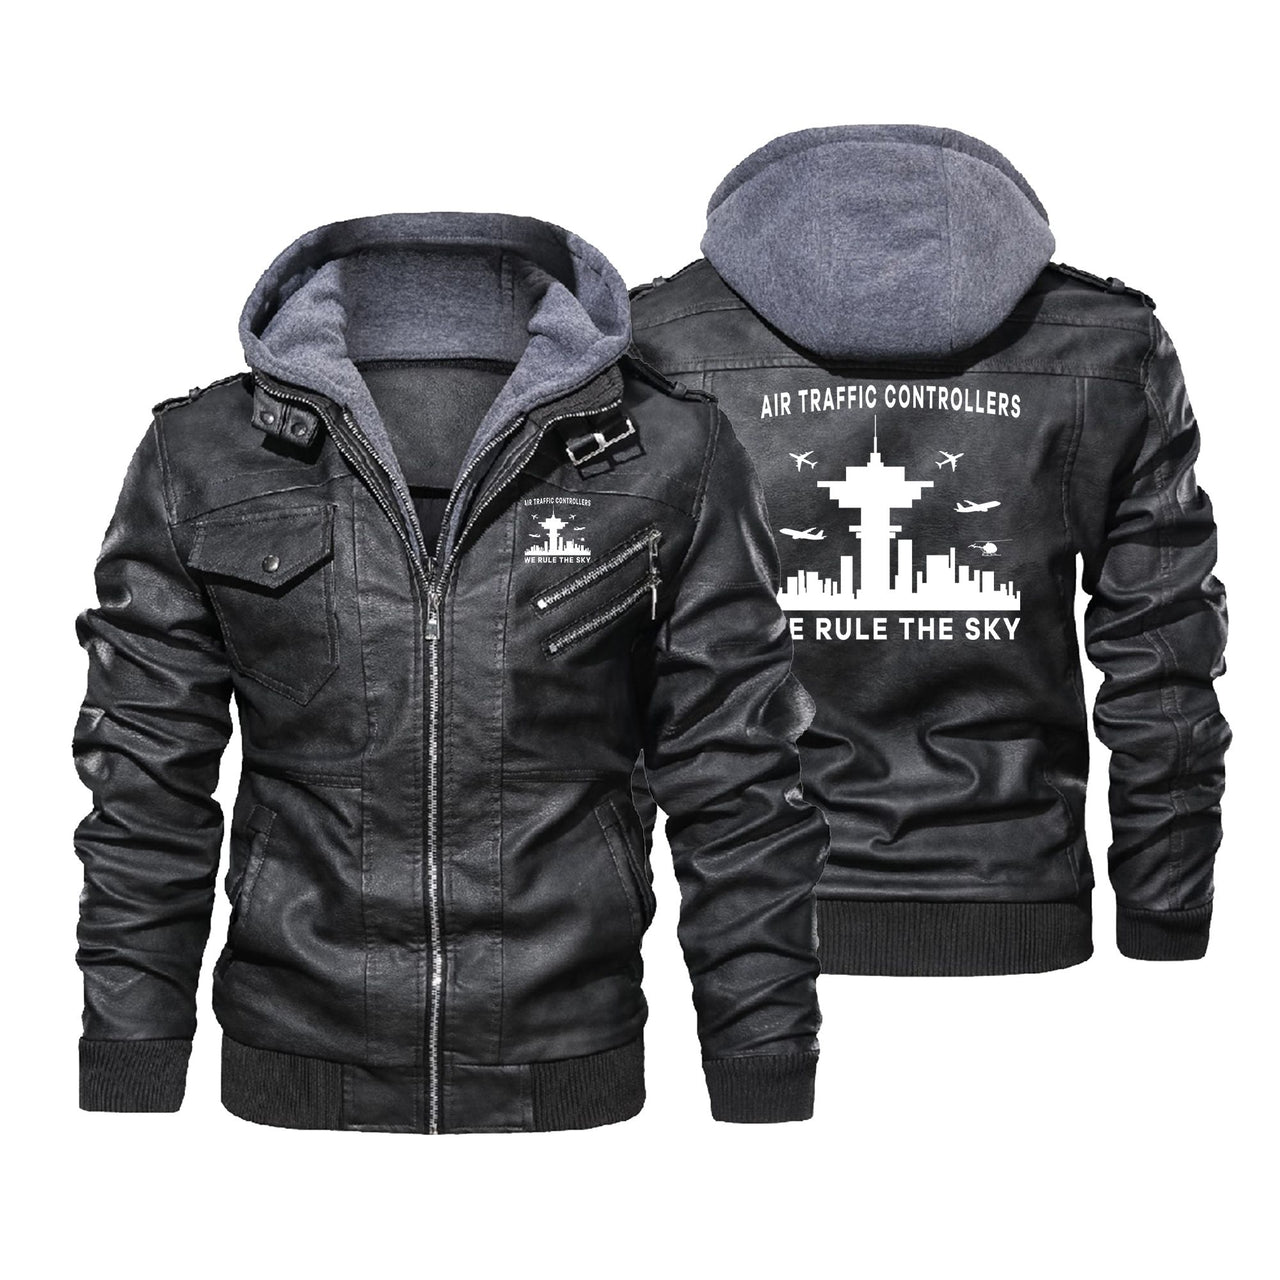 Air Traffic Controllers - We Rule The Sky Designed Hooded Leather Jackets